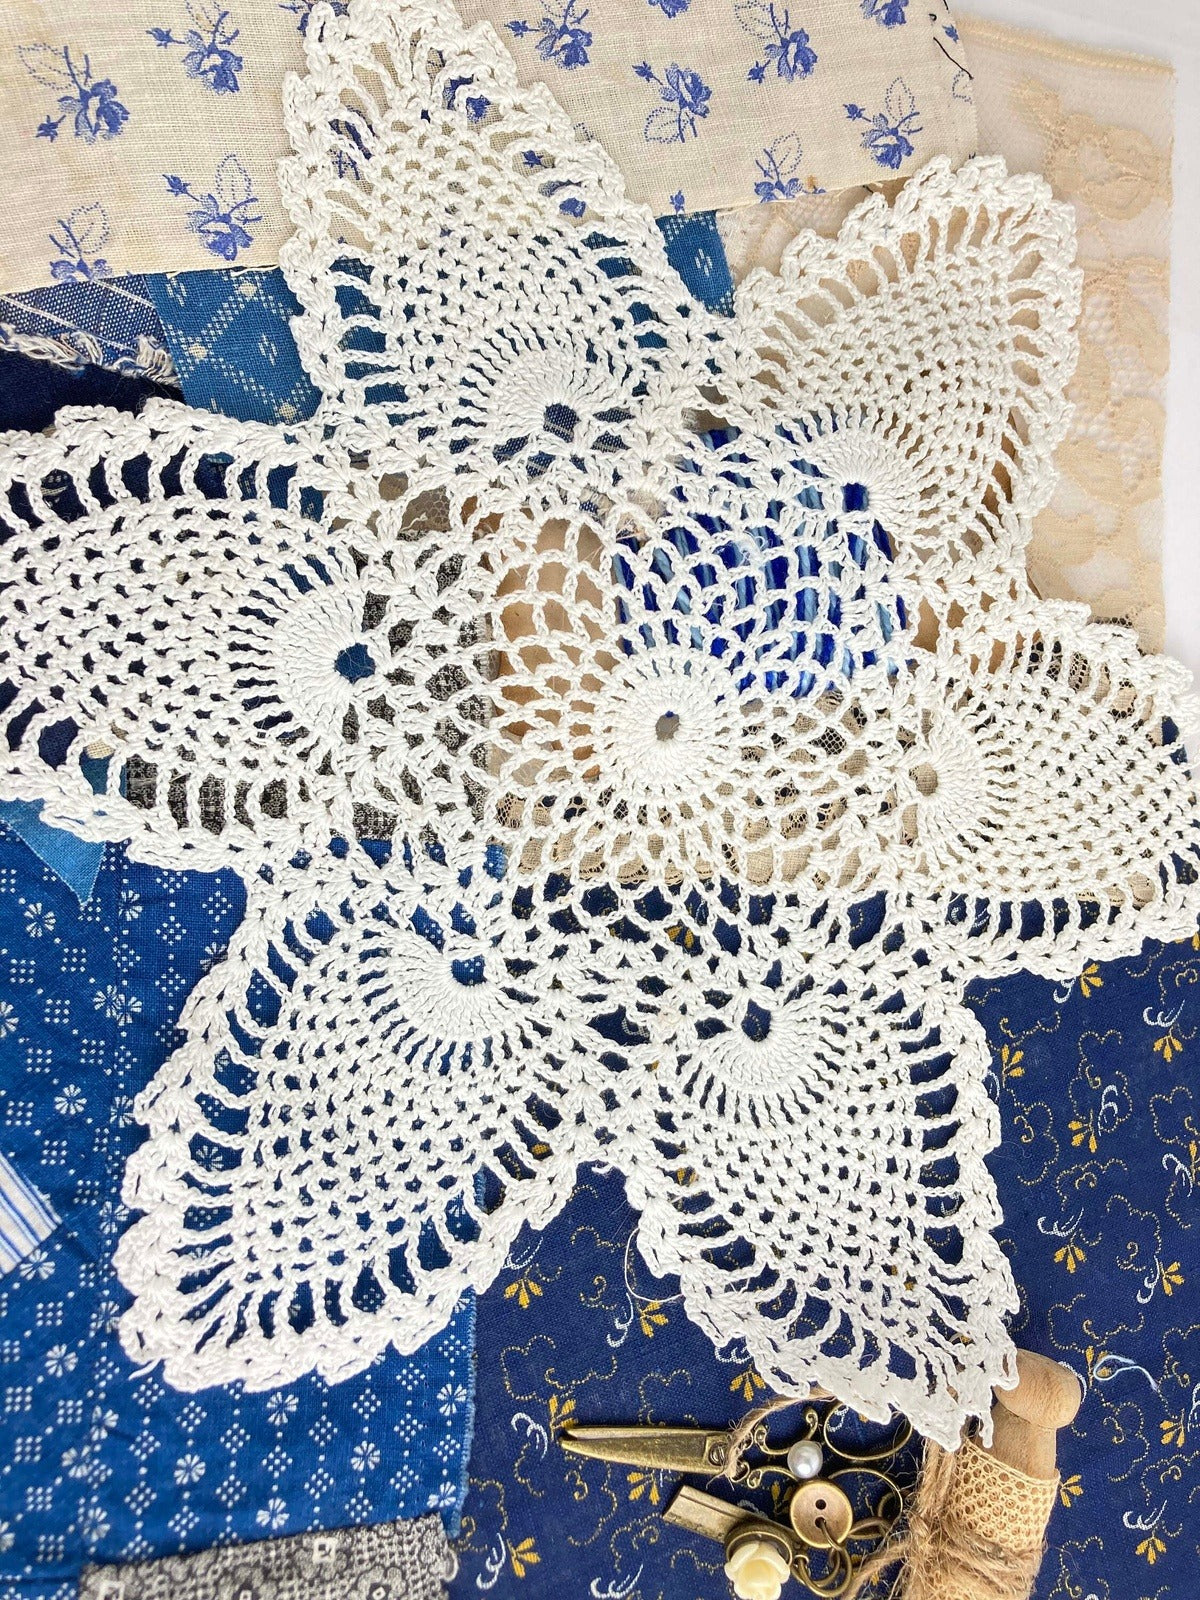 https://www.thescrapologist.com/cdn/shop/files/Slow-Stitch-Kit-Indigo-Blue-Quilt-Blocks-and-Trim-Antique-Fabric-and-Lace-Assortment-1800s-to-1920-Vintage-Textiles-for-Junk-Journals-or-slow-stitch-2.jpg?v=1702901081&width=1445